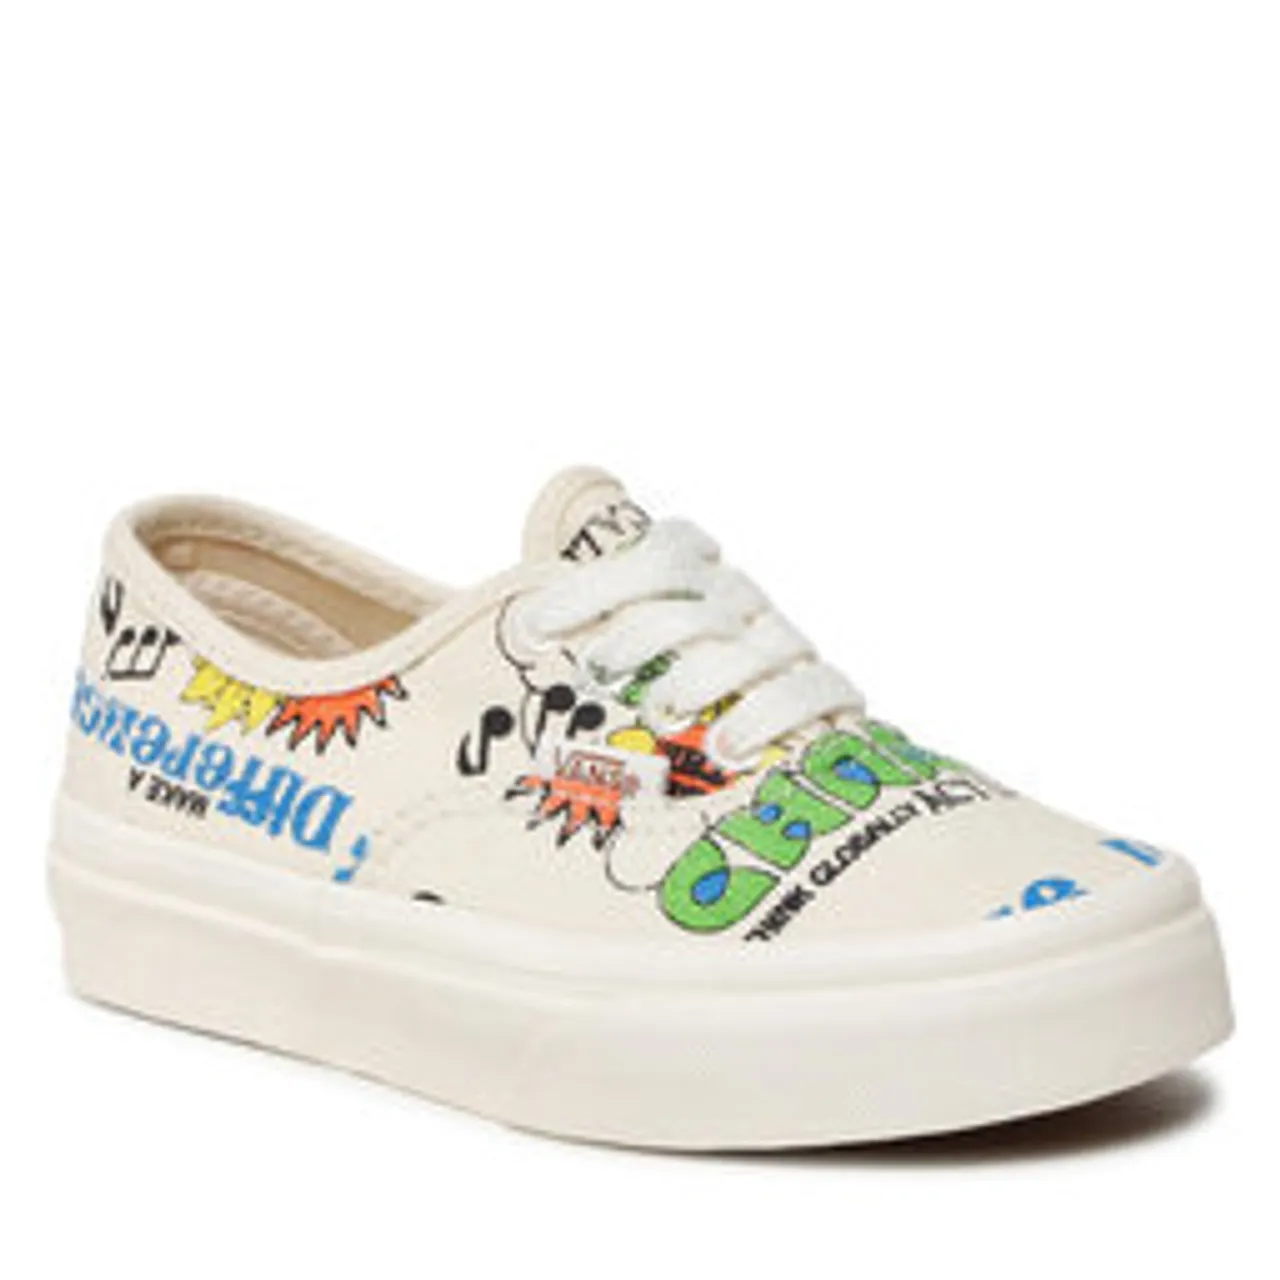 Sneakers aus Stoff Vans Authentic VN0A3UIVARG1 (Eco Theory) Eco Positivi